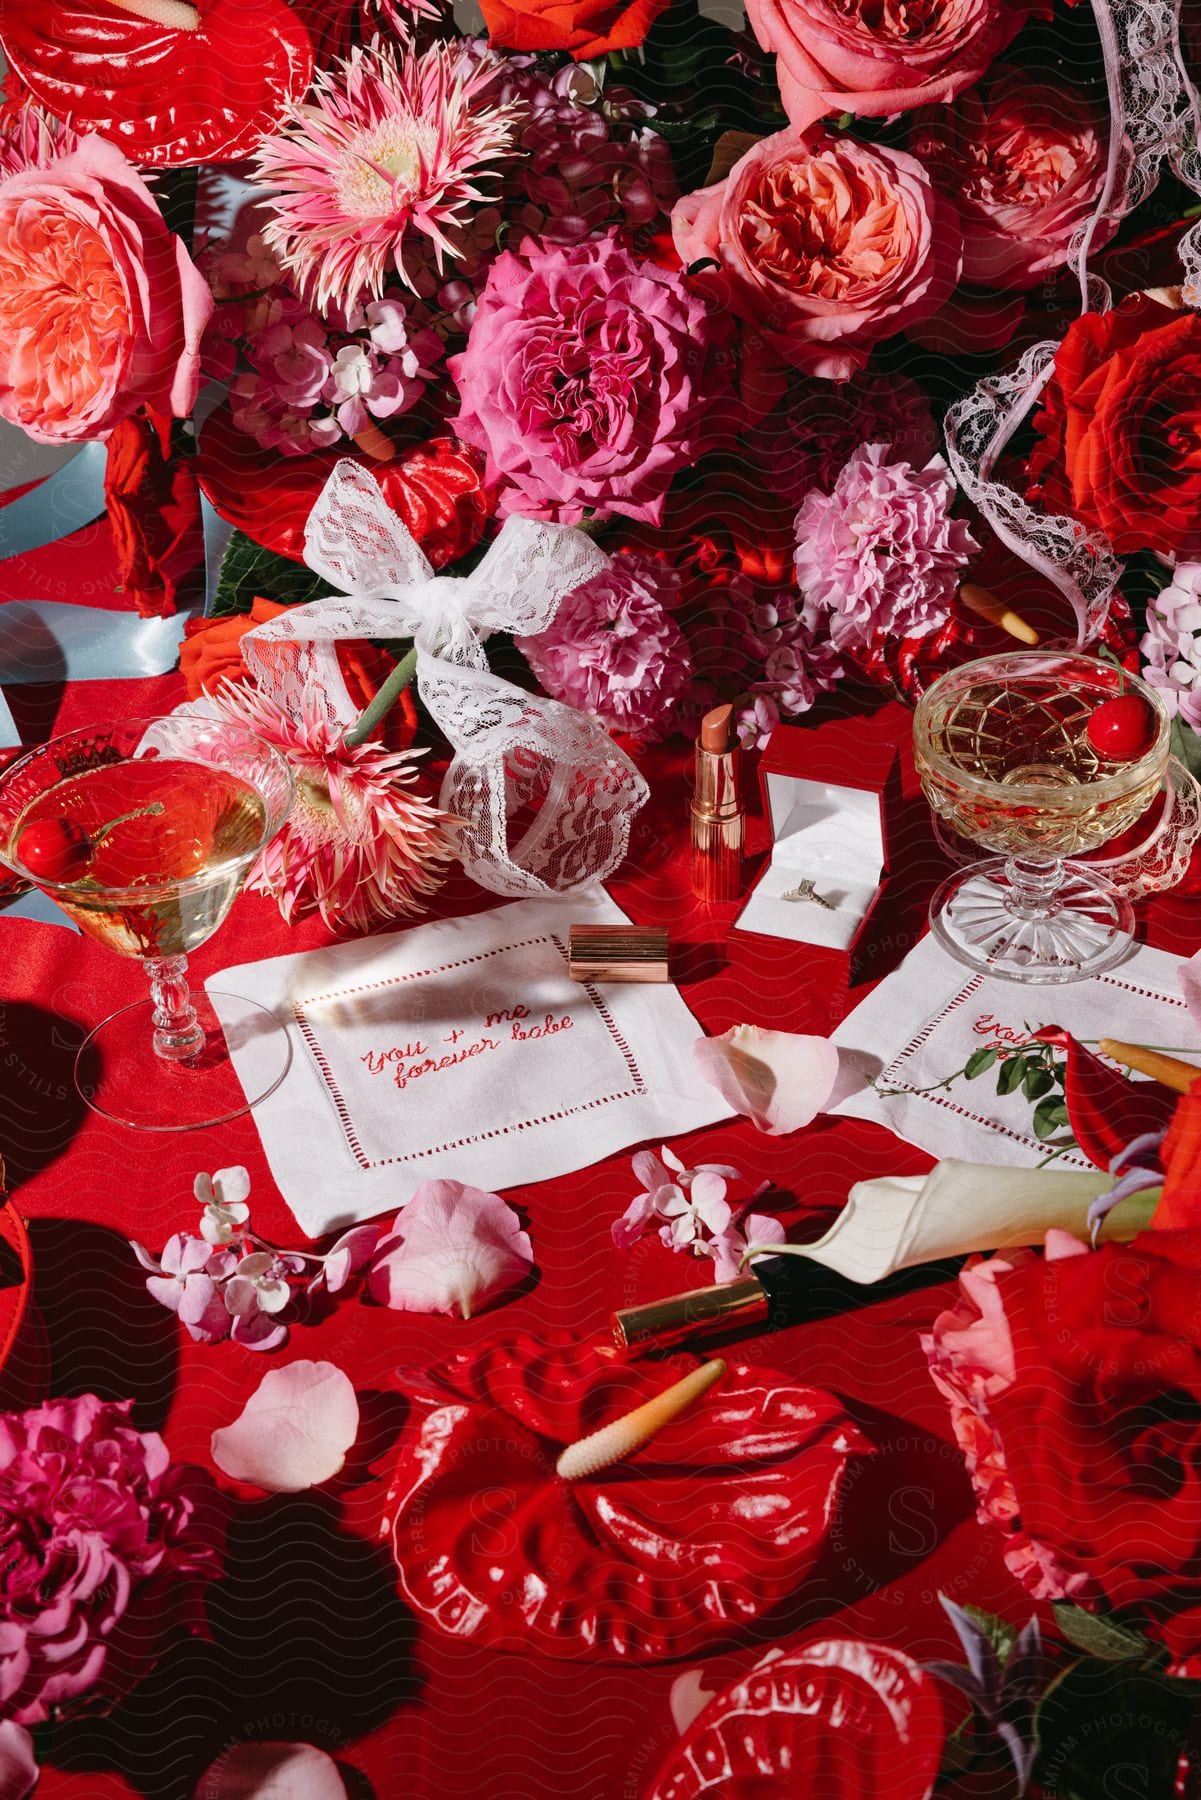 A white cloth on a table with a red cloth and two glasses with drinks and there are many red flowers